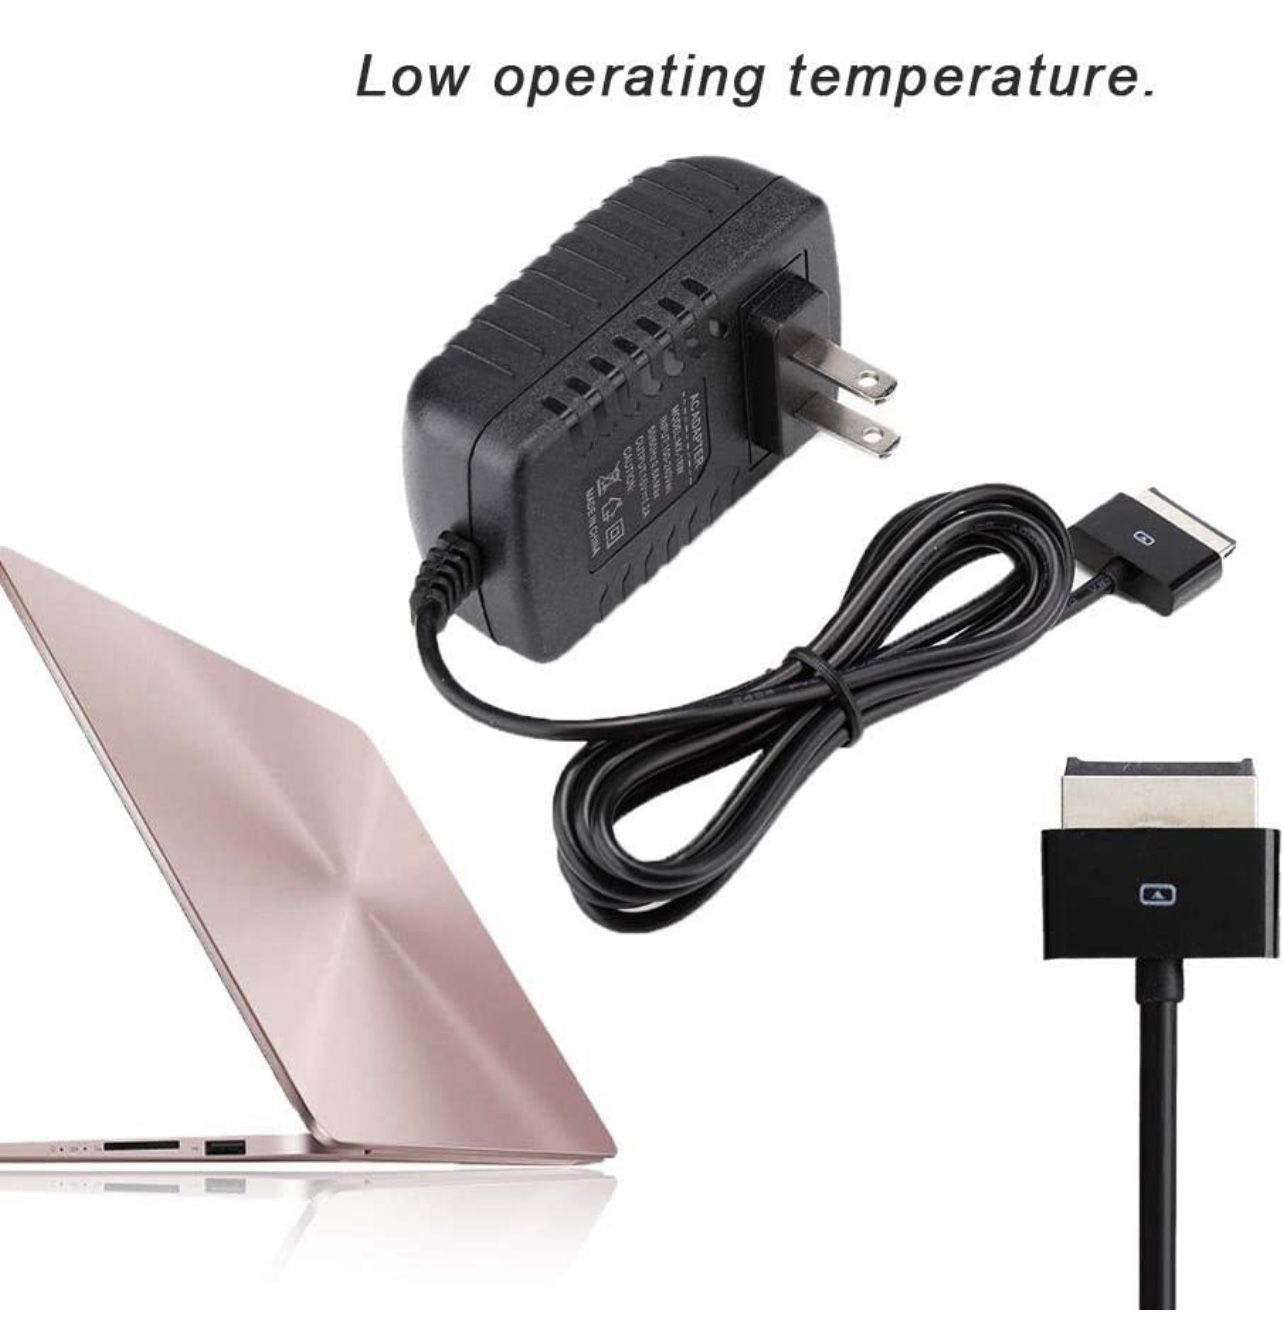 AC 15V 1.2A Tablet Power Adapter for Asus Eee Pad Transformer TF201 TF101 TF300 TF300T TF700 TF700T